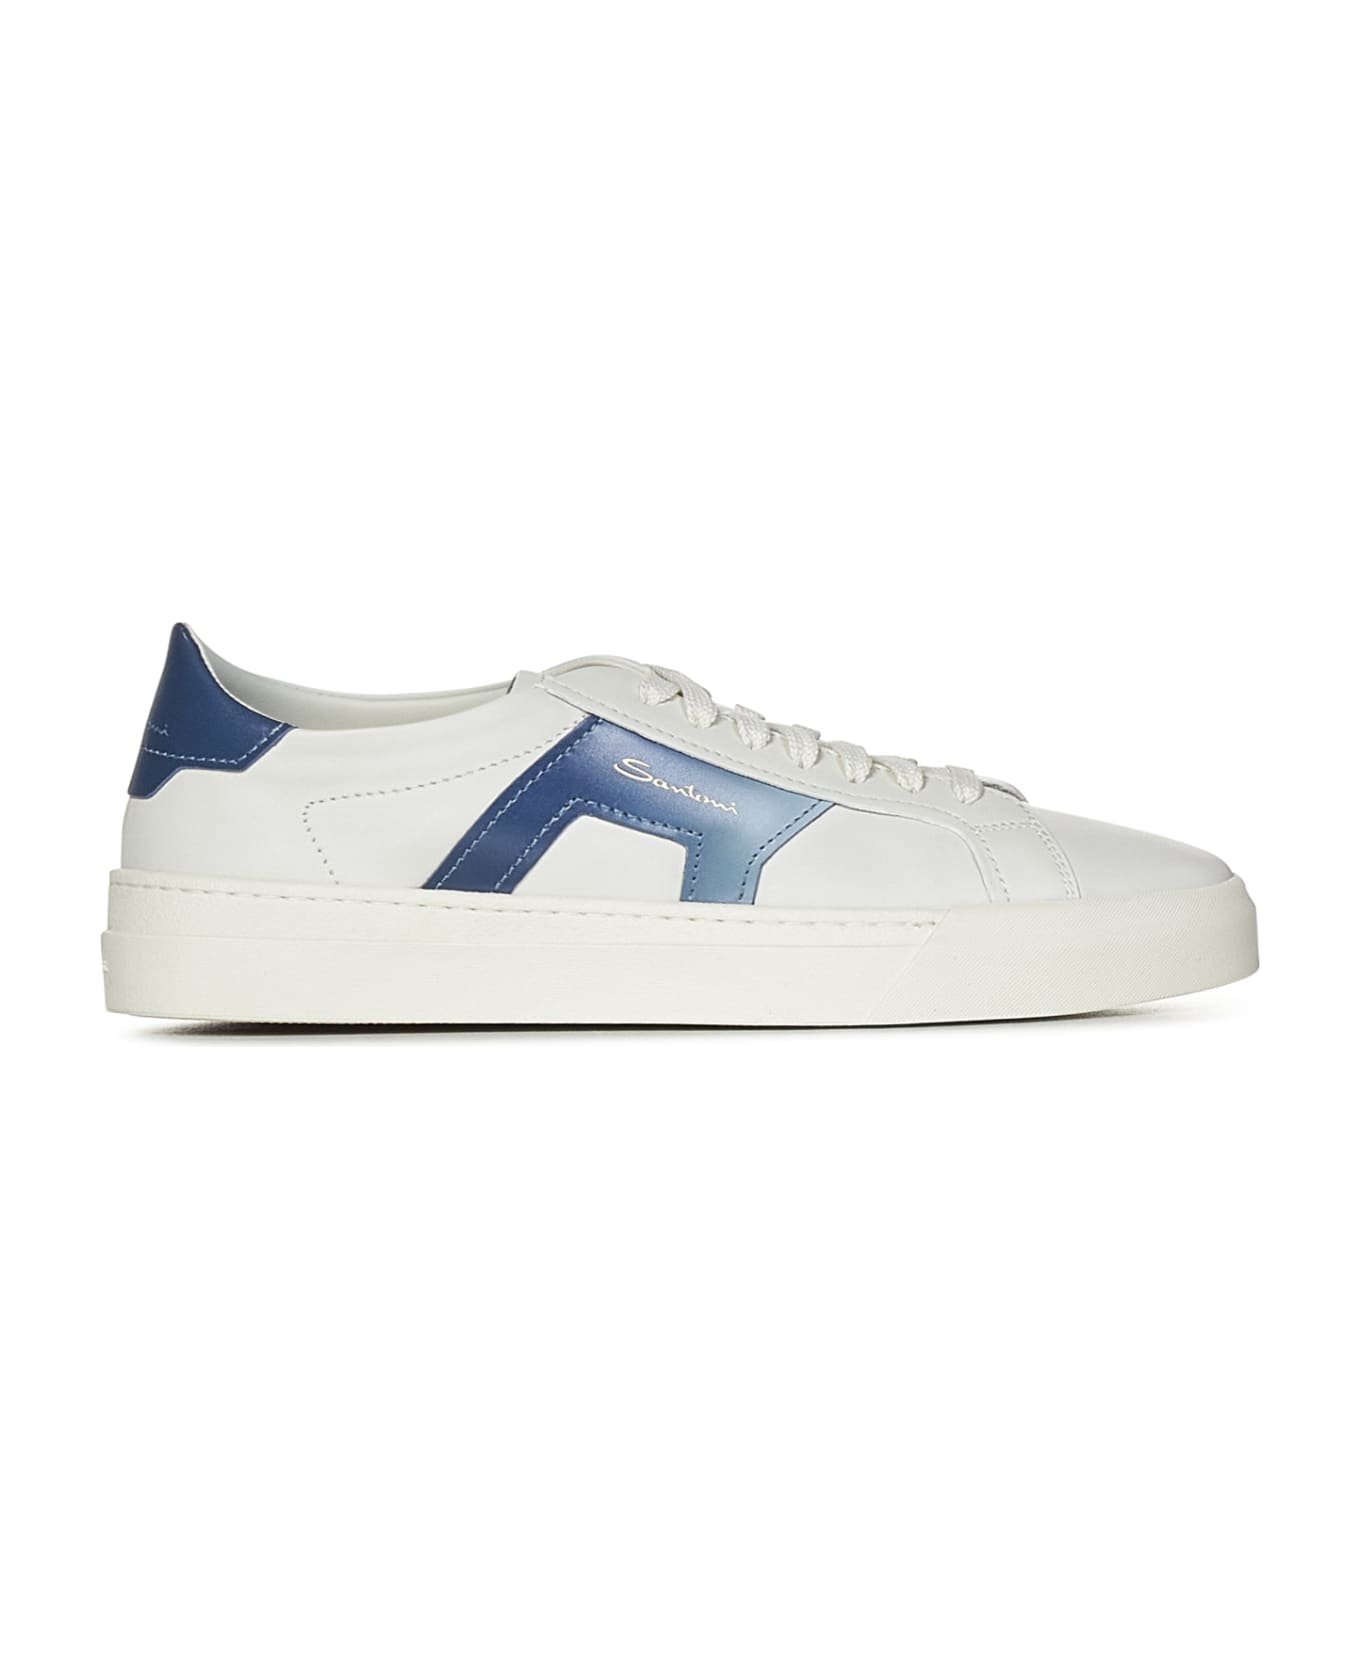 Santoni White And Blue Leather Buckle Sneakers - Blue